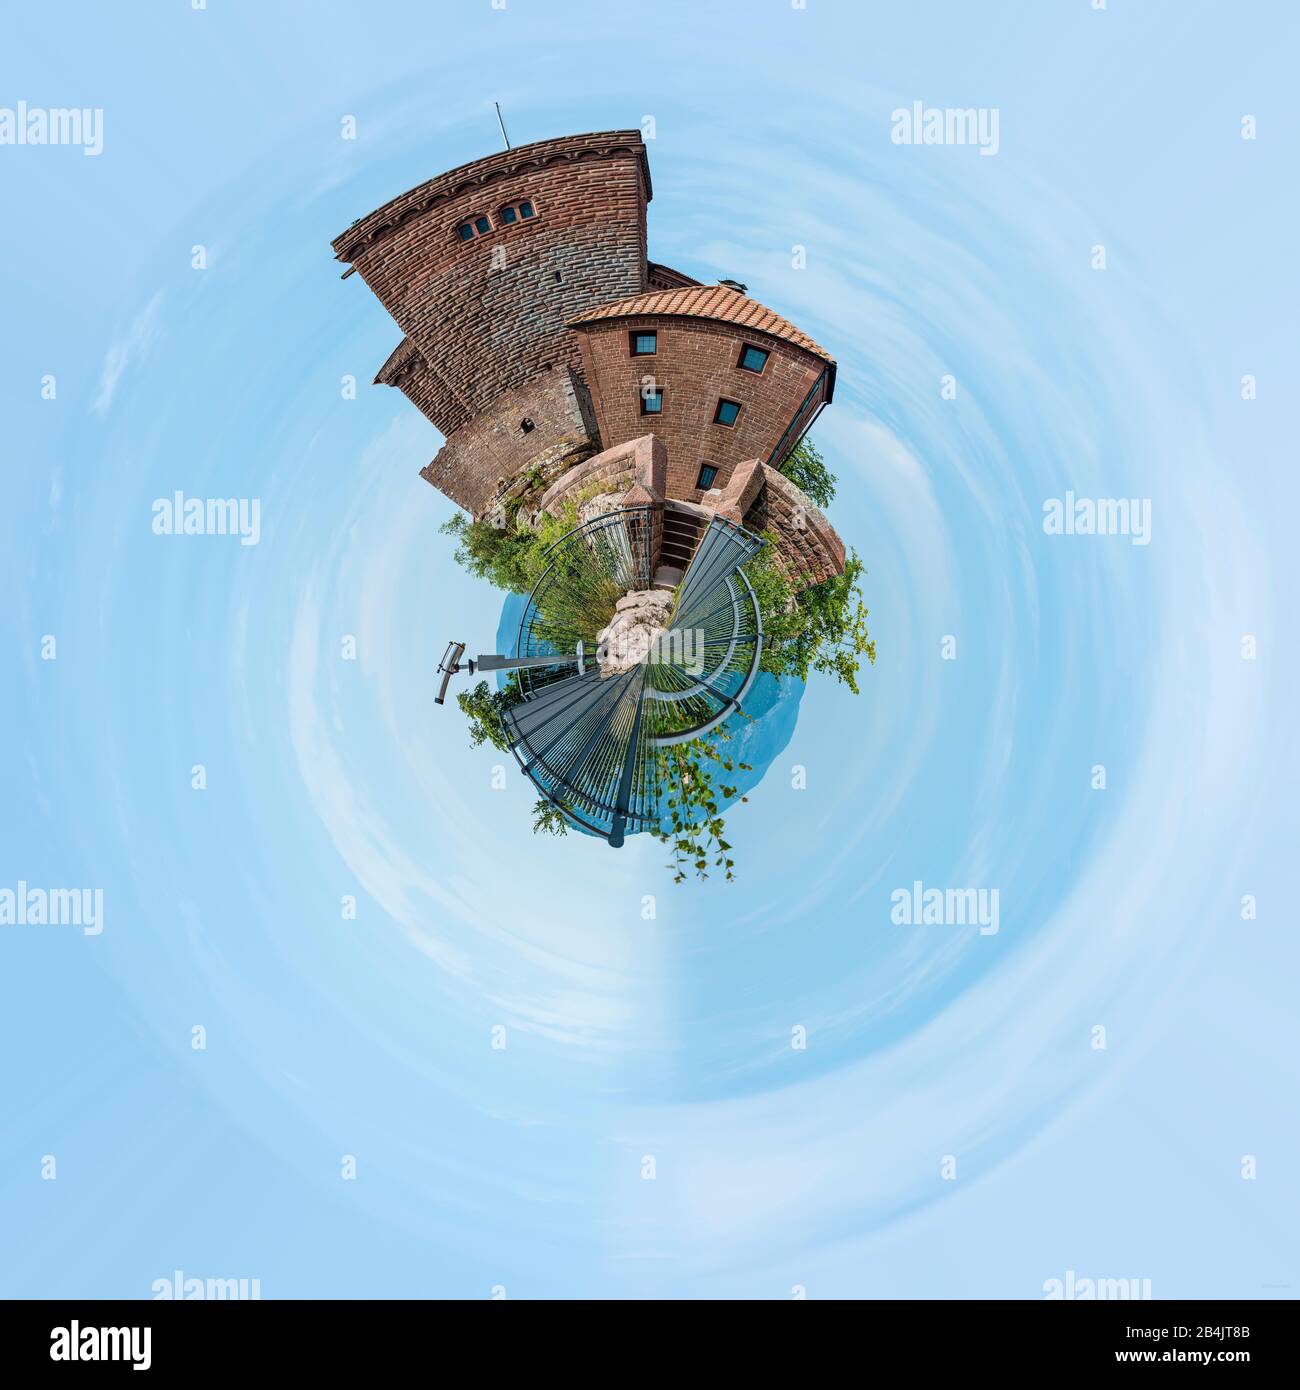 Castle Trifels (near Annweiler, Palatinate) as Little Planet, rock castle from Buntsandstein, cultural assets from the High Middle Ages, Hort of imperial insignia, z. B. (imperial crown), Richard Lionheart was there prisoner, protected cultural property after Hague convention, Stock Photo